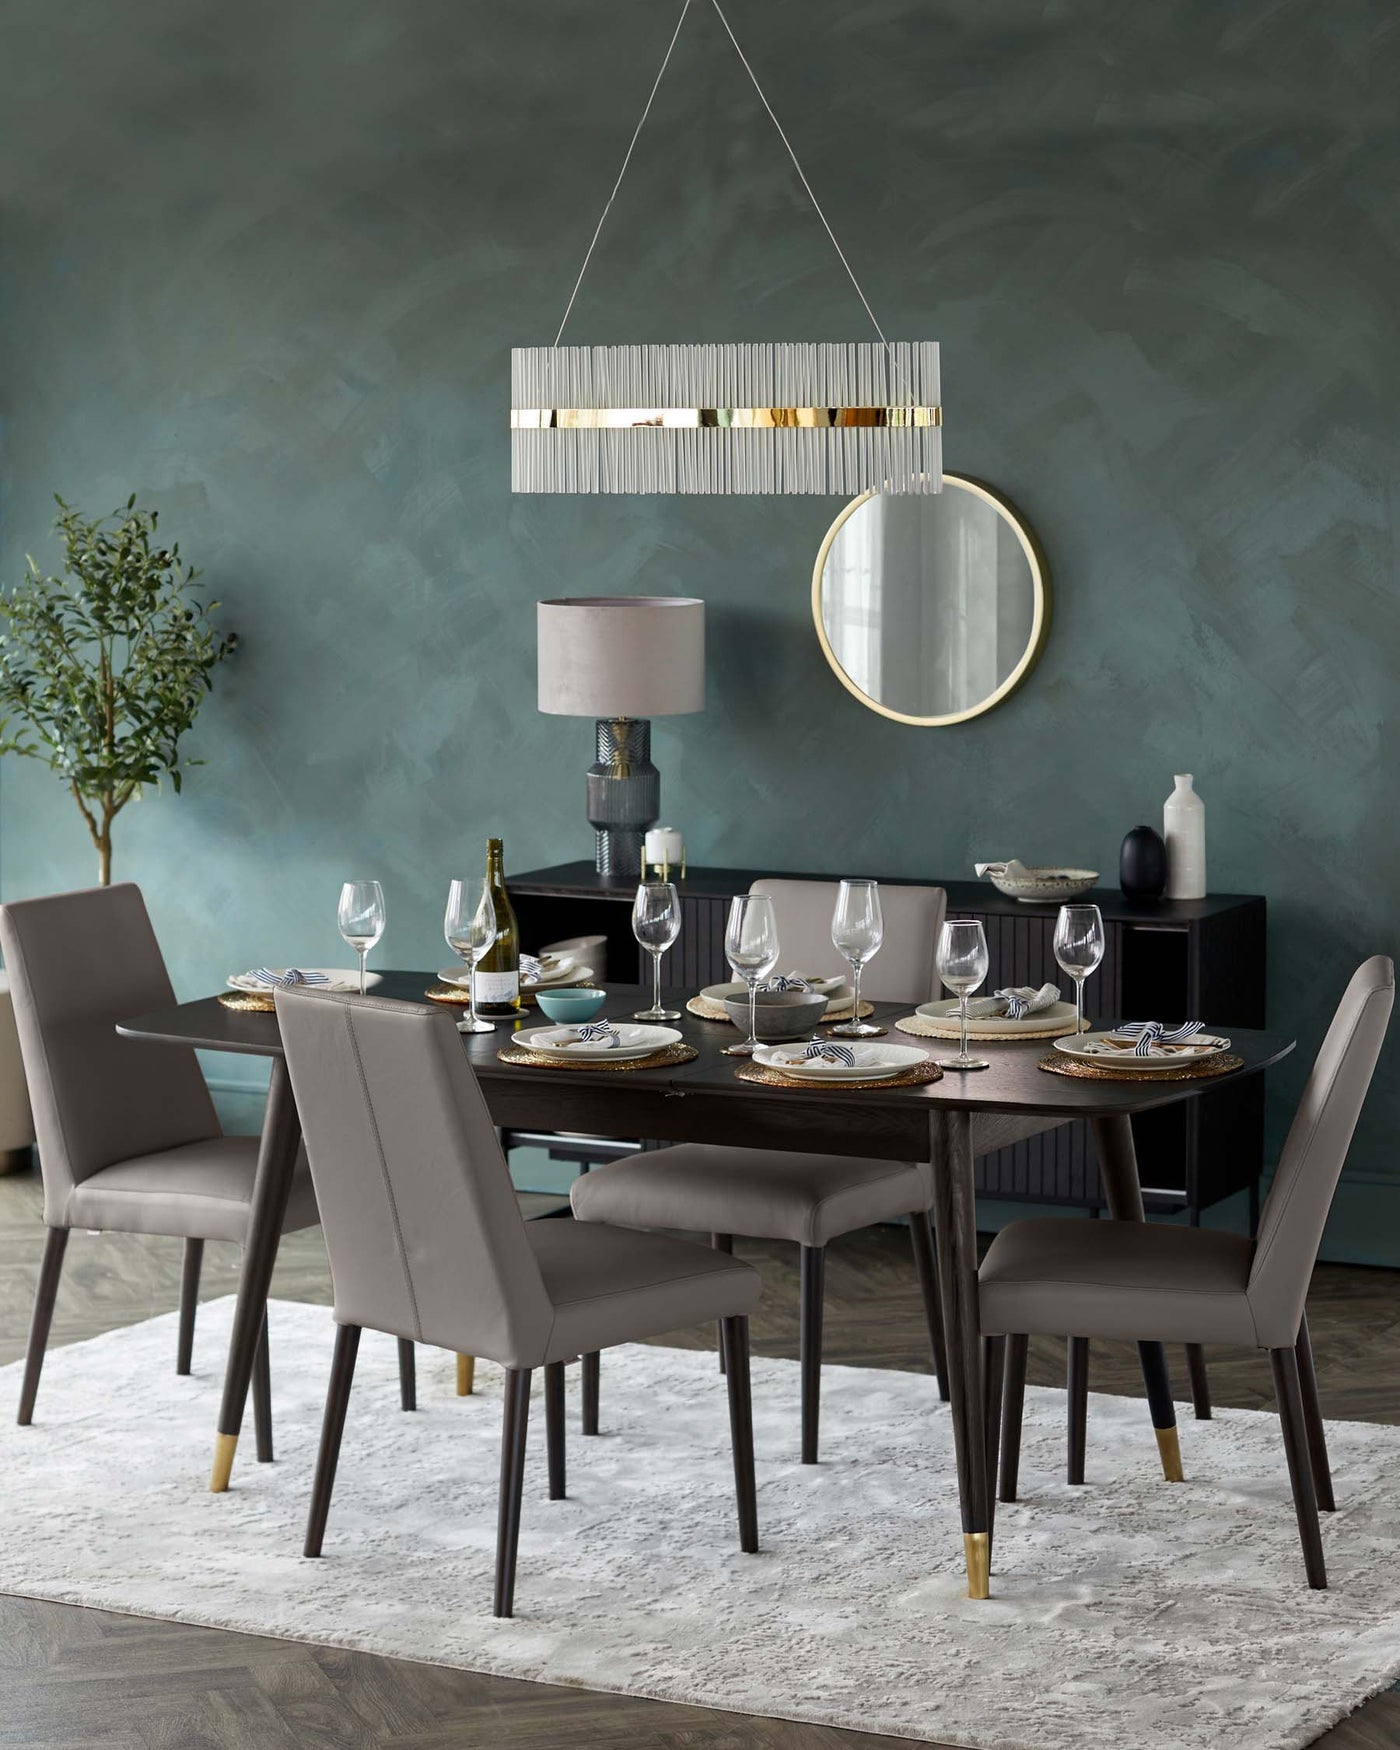 Elegant dining room setup featuring a modern rectangular wood dining table with gold-accented feet, surrounded by six matching taupe upholstered chairs with high backs and slim legs. A contemporary hanging pendant light with a linear design and metallic accents illuminates the space. A side cabinet and decorative round mirror with a thin gold frame complement the setting.